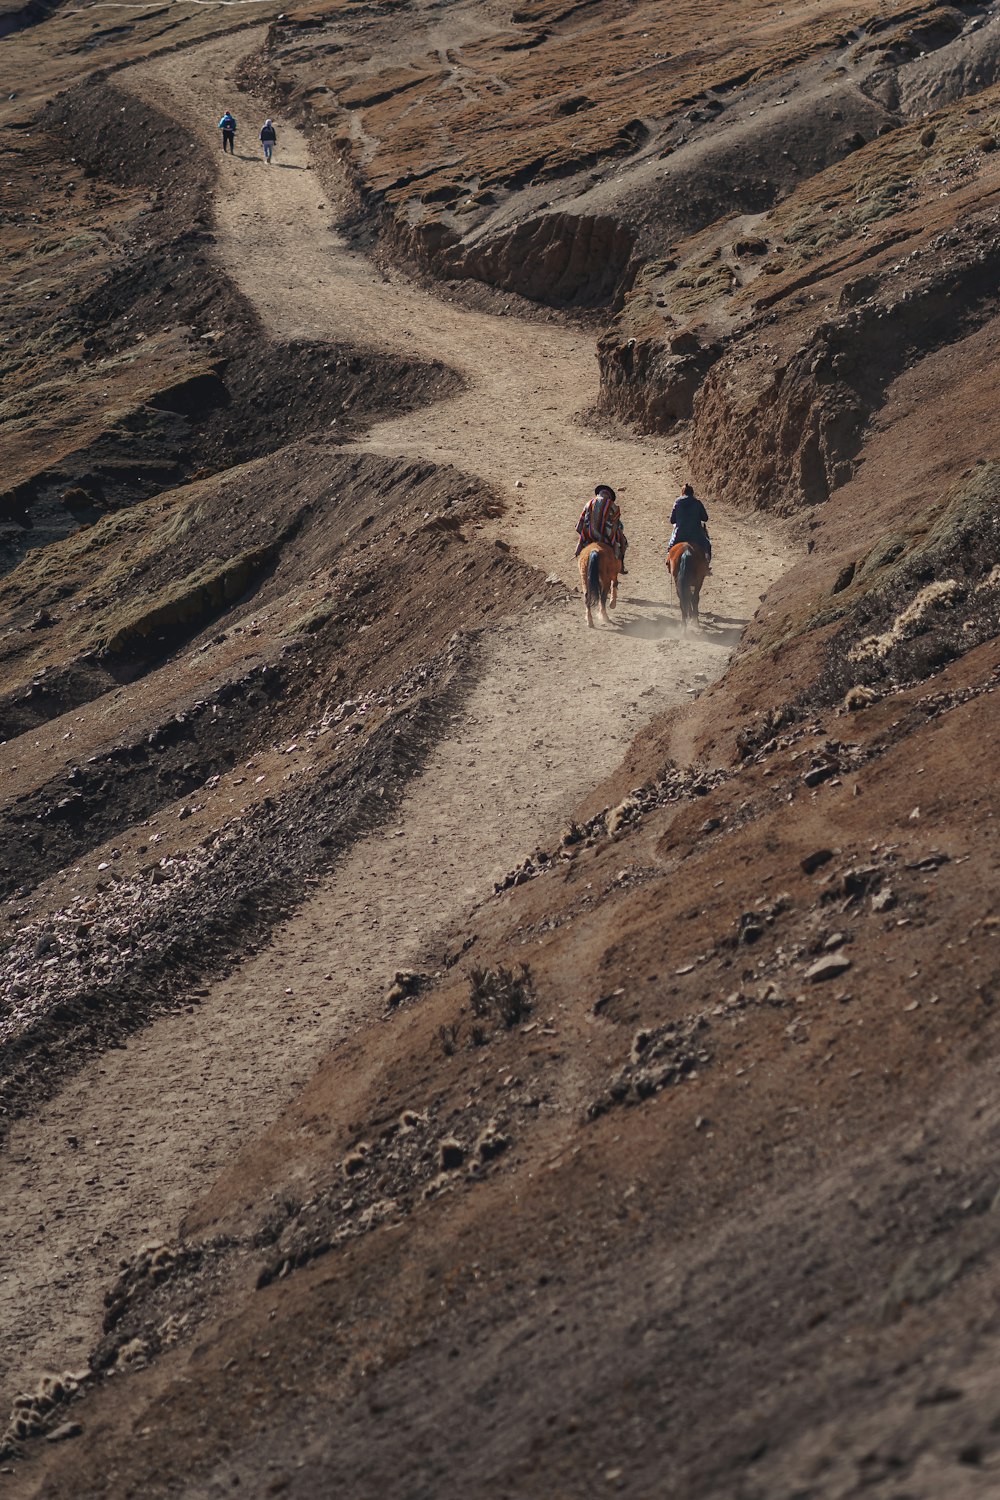 a group of people walking on a dirt path in a rocky area